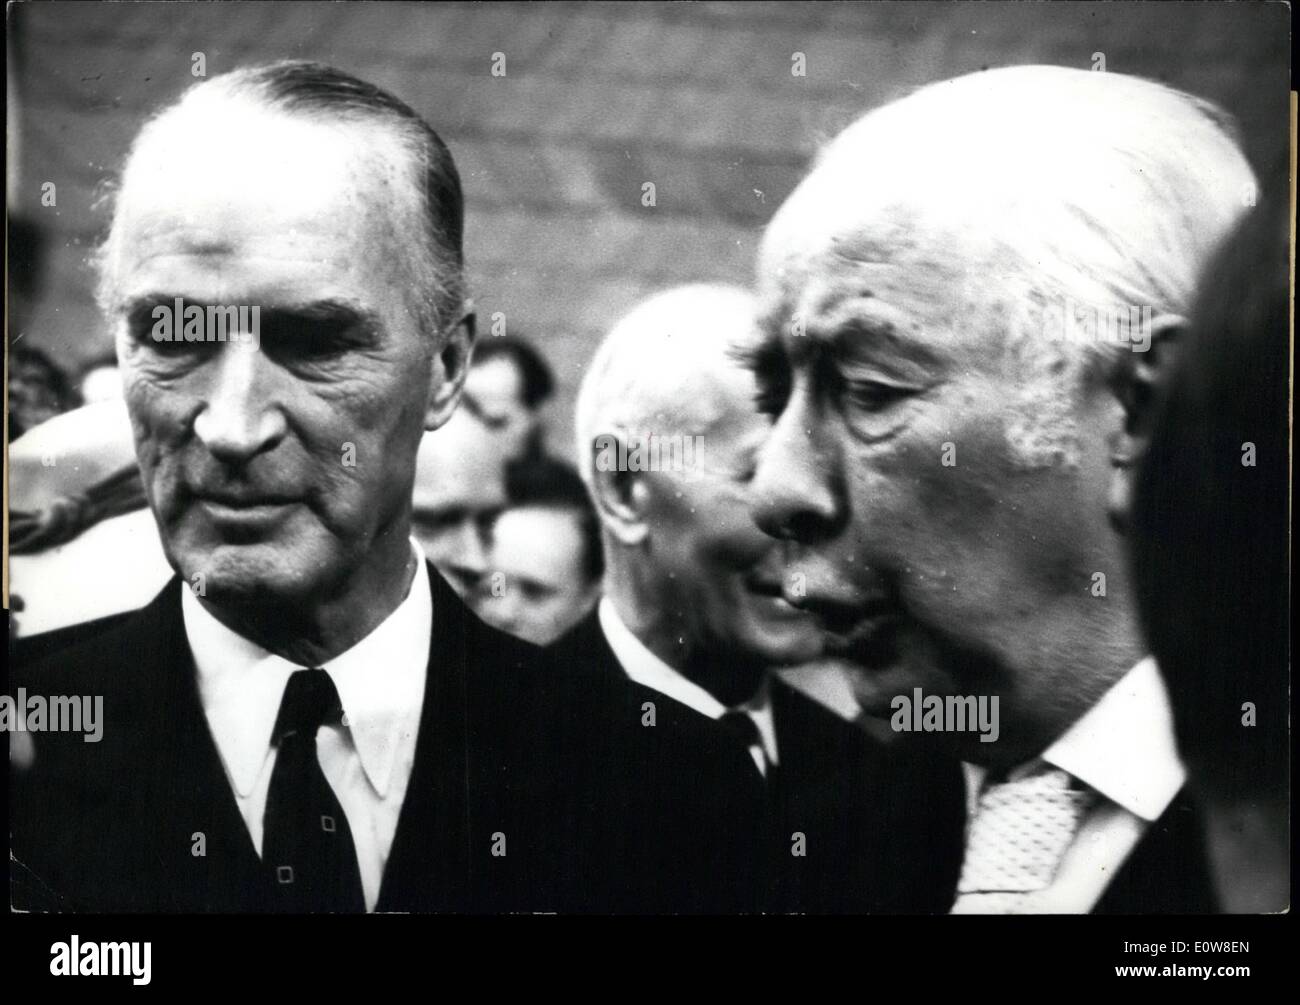 Nov. 11, 1961 - On Monday, November 2o. the wellknown under - taking Krupp in Essen / Germany celebrated his 15o - year - jubilee. Under the honour - guests was the former Presidet Prof. TheÃ¢â‚¬Â¢ odor House. - On the picture on.the right. On the left the President. of the undertaking Krupp, Alfried Krupp von Bohlen and Halbach. Stock Photo